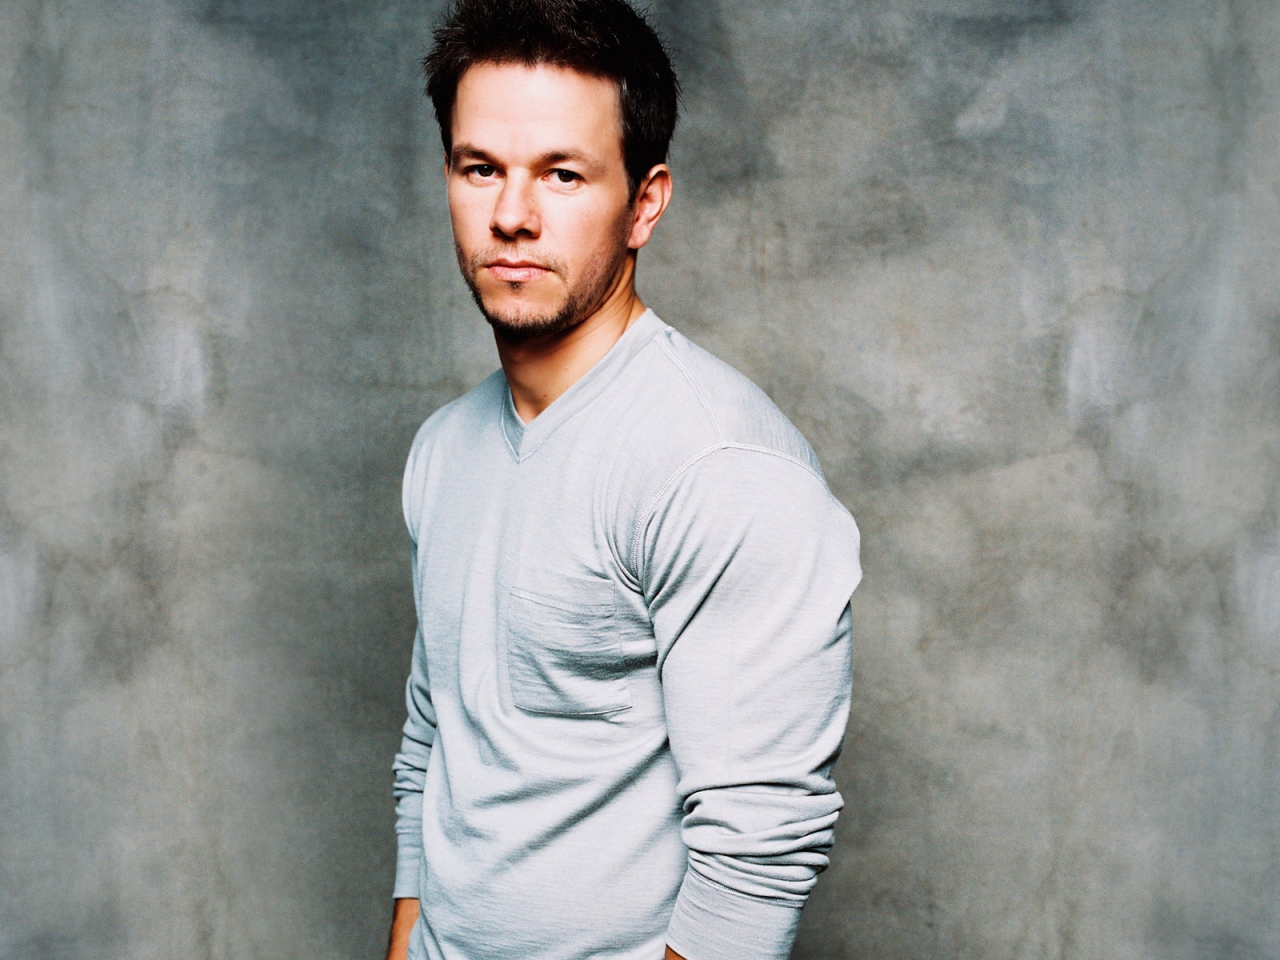 Mark Wahlberg Look for 1280 x 960 resolution.